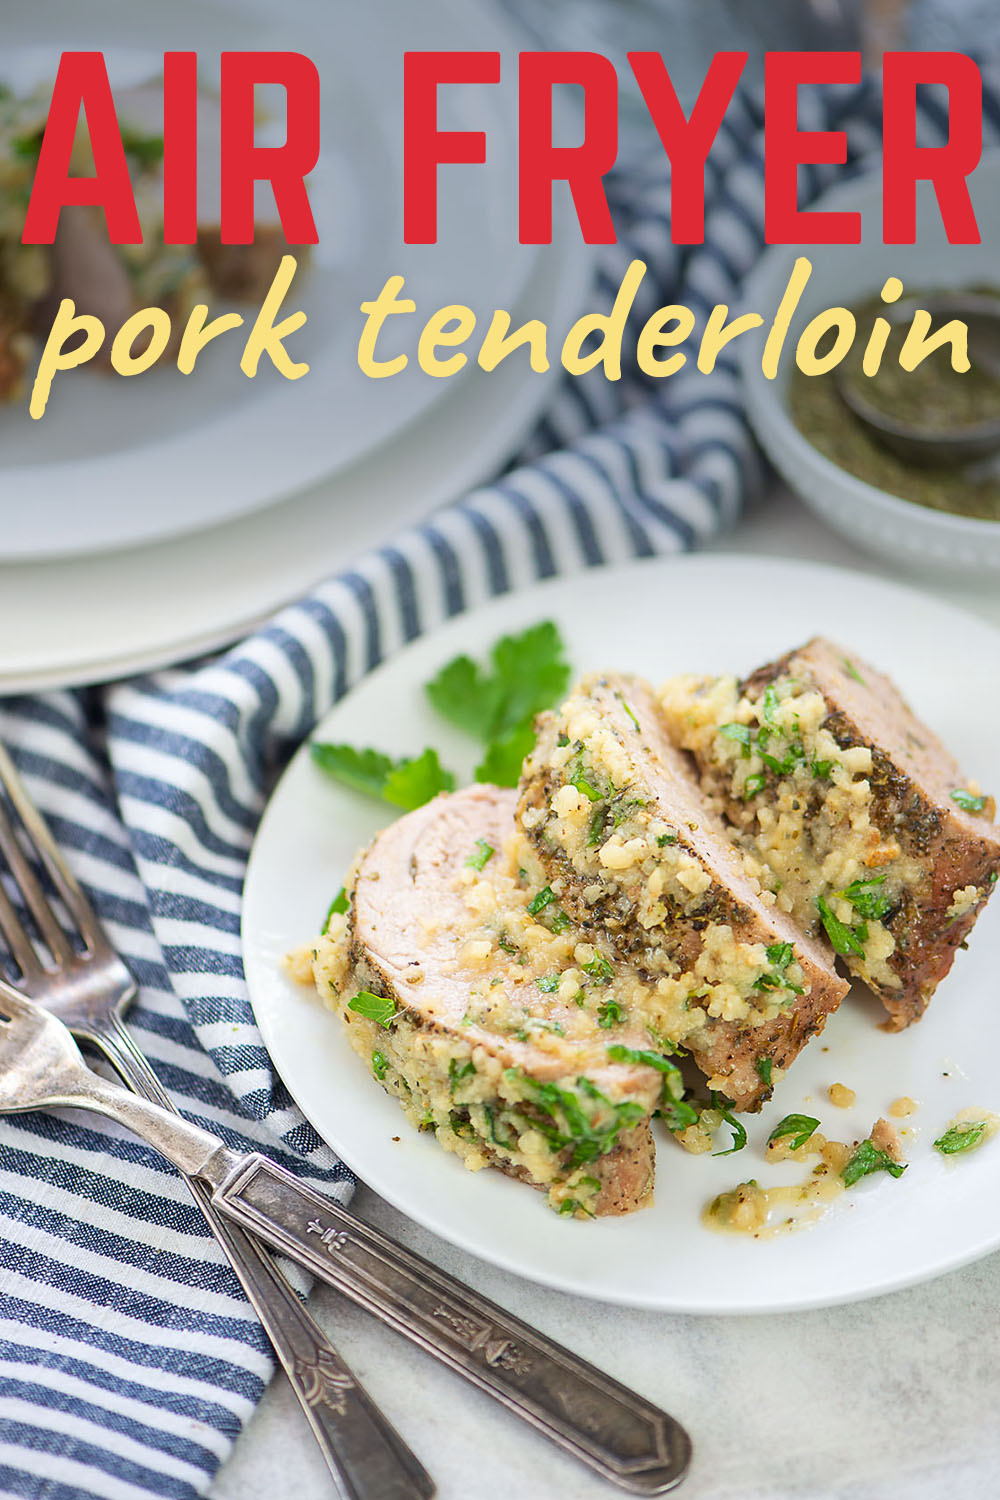 Try this air fryer pork tenderloin recipe for a super simple meal that seems more complex.  It is an impressive cut of meat that is really tender and juicy!